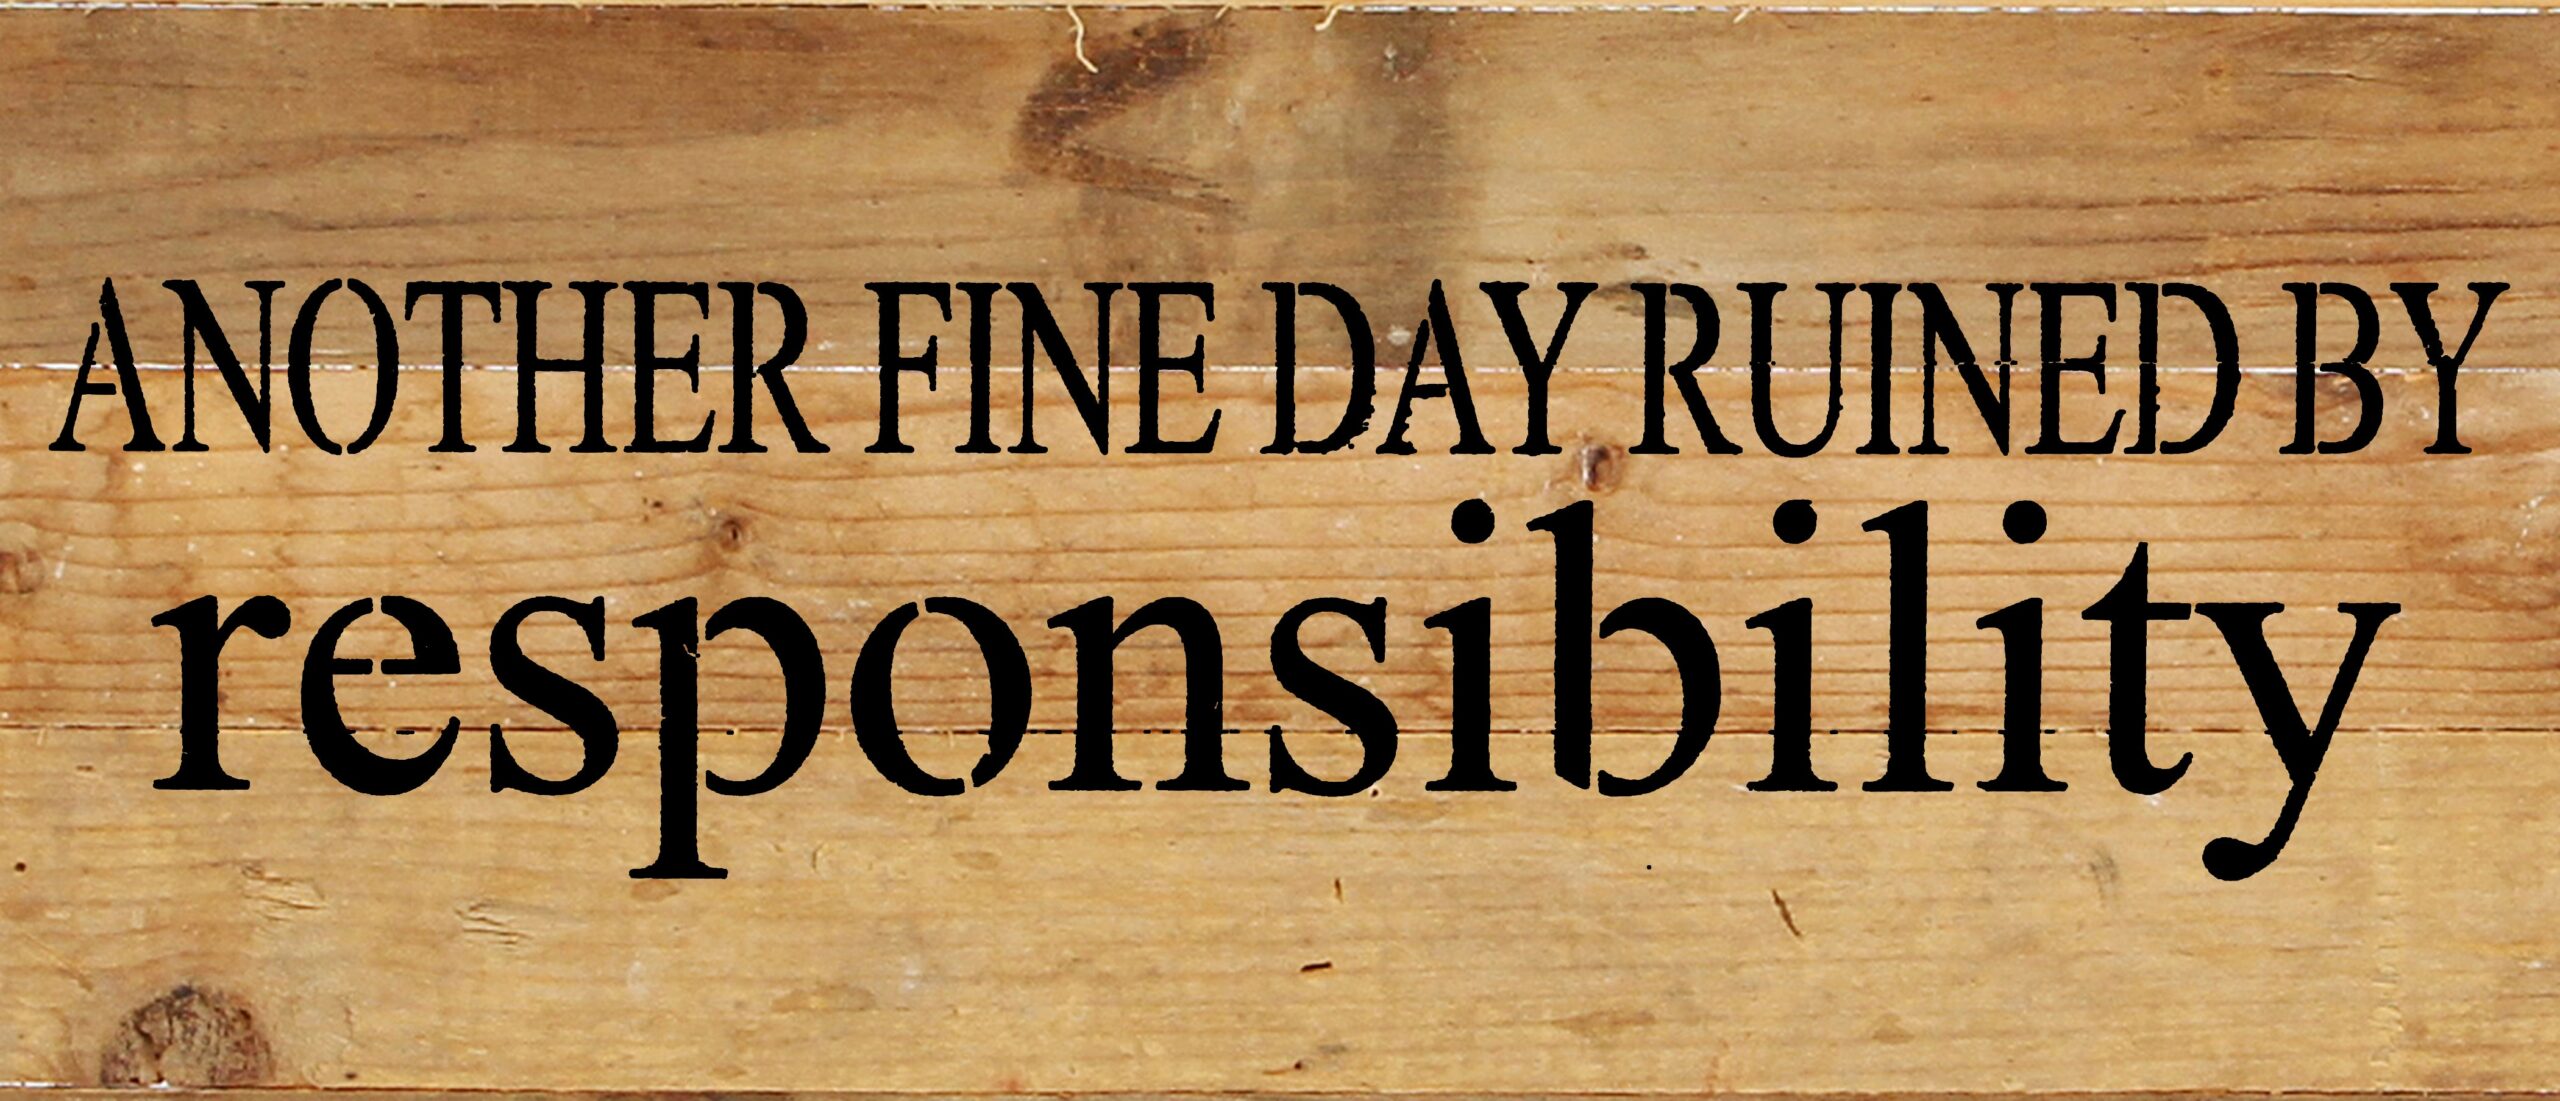 Another fine day ruined by responsibility / 14"x6" Reclaimed Wood Sign